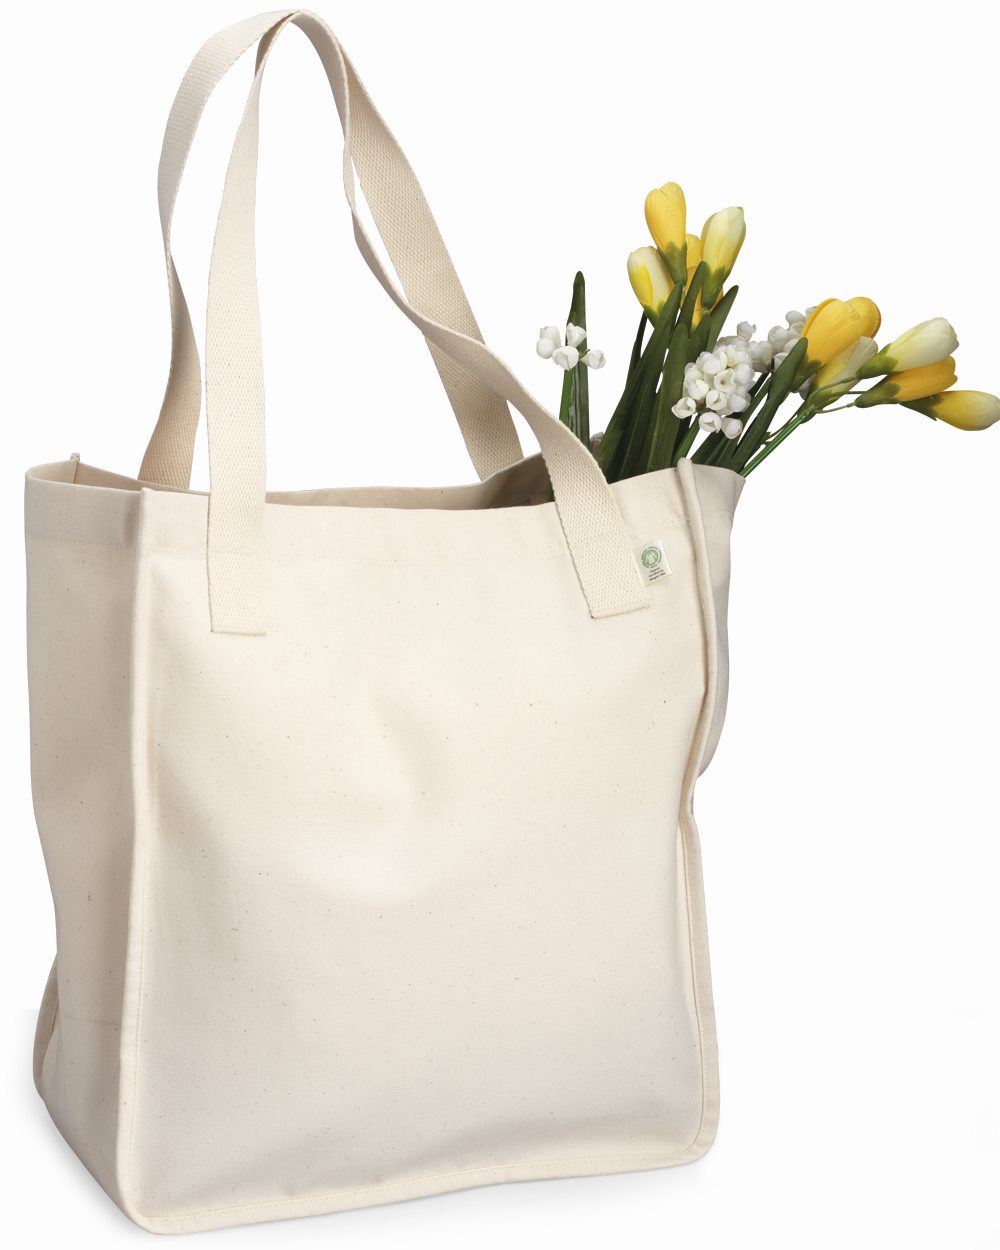  Simply shopping canvas tote bag